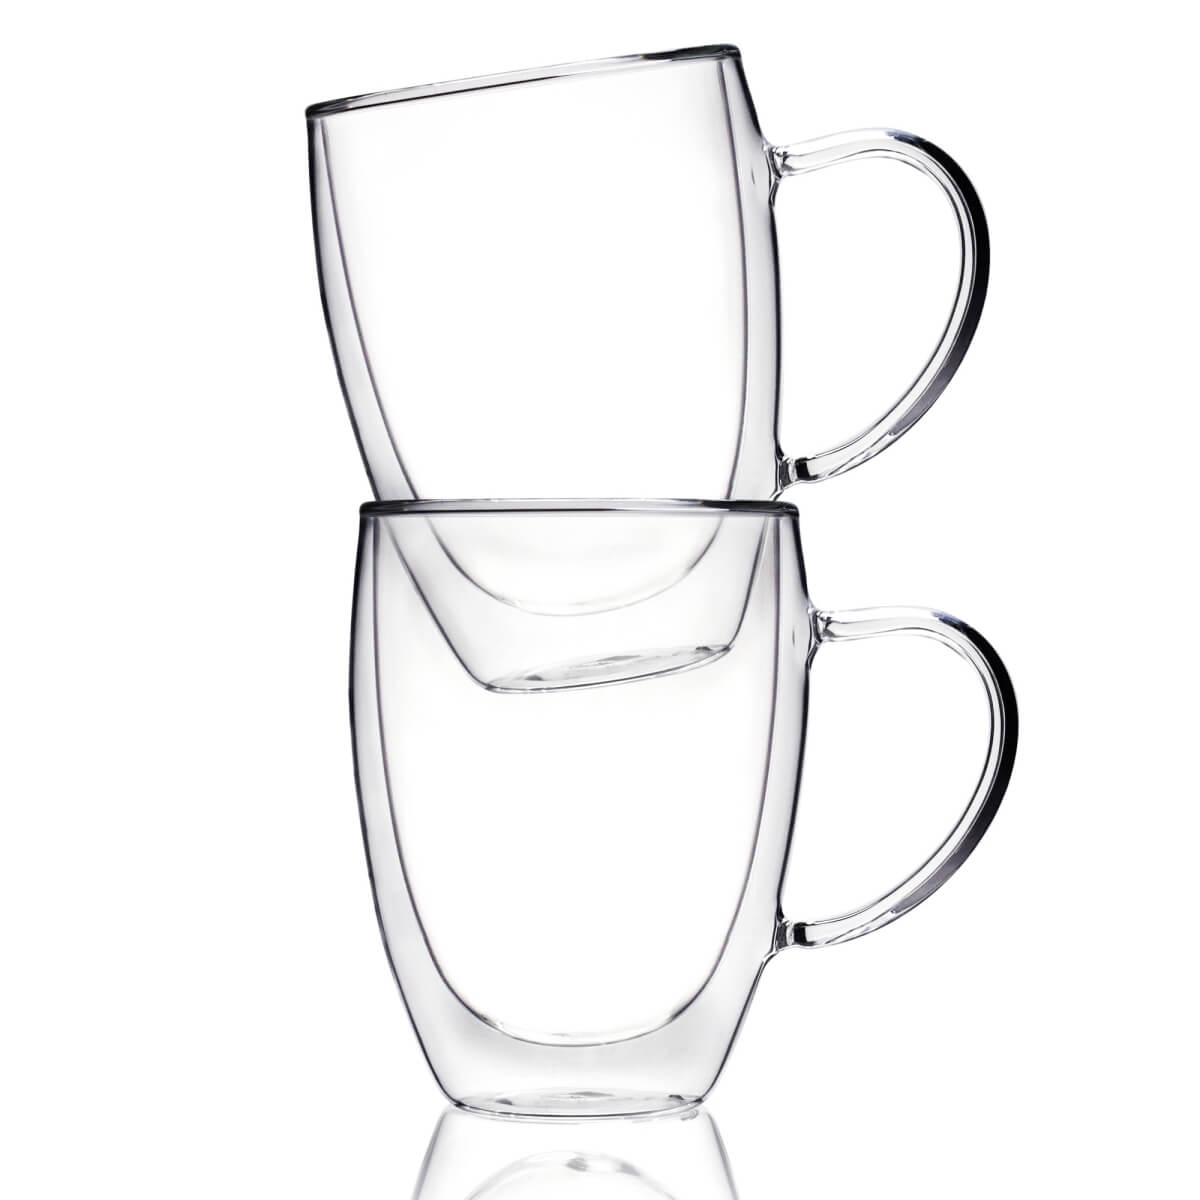 MEWAY 12oz/6 pack Coffee Mugs,Clear Glass Double Wall Cup with handle for  Coffee, Tea, Latte, Cappuccino (12 oz，6)